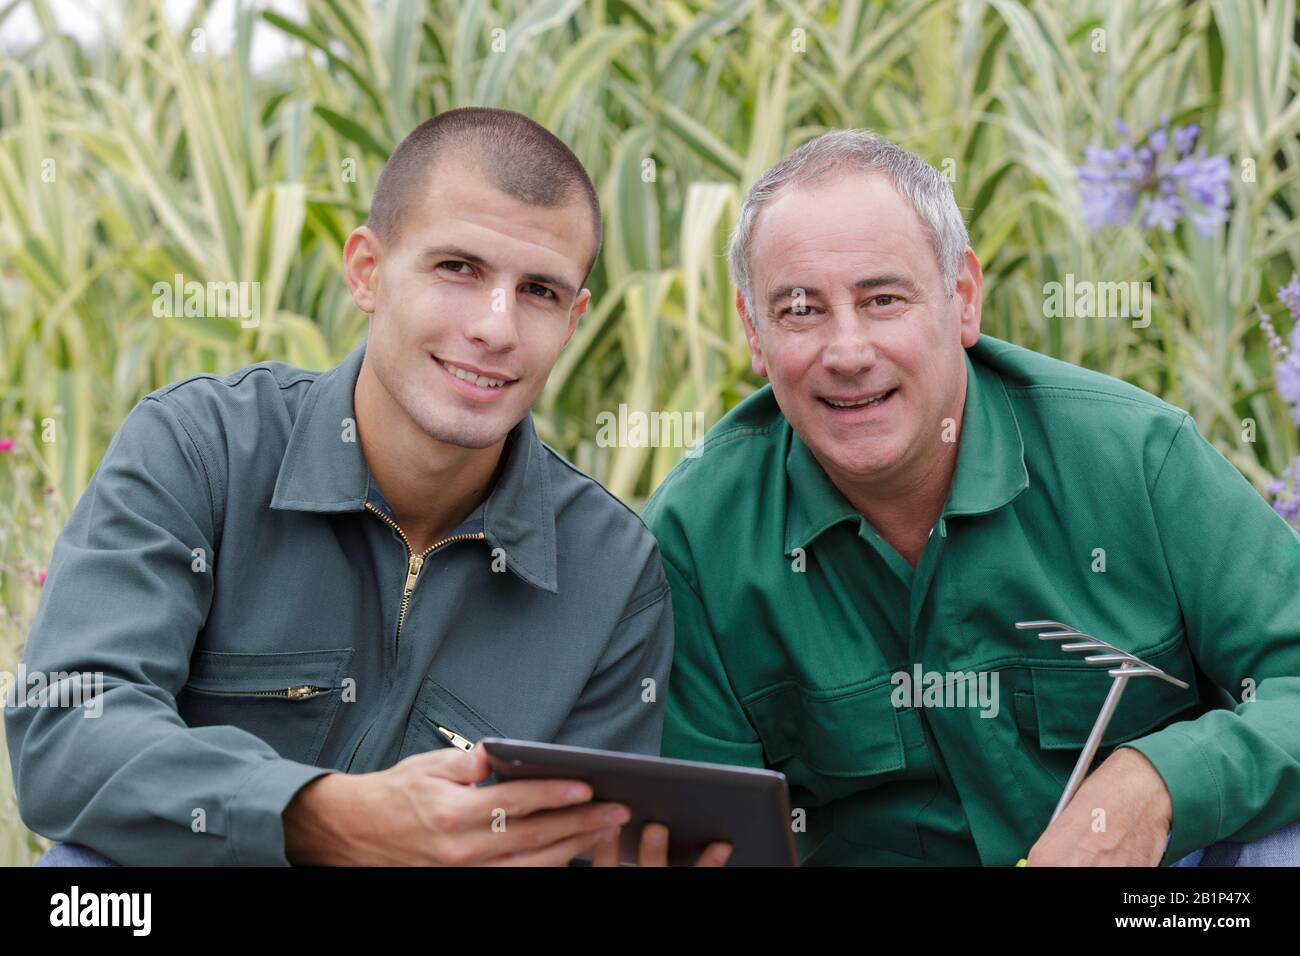 portrait of two landscape gardeners working together Stock Photo